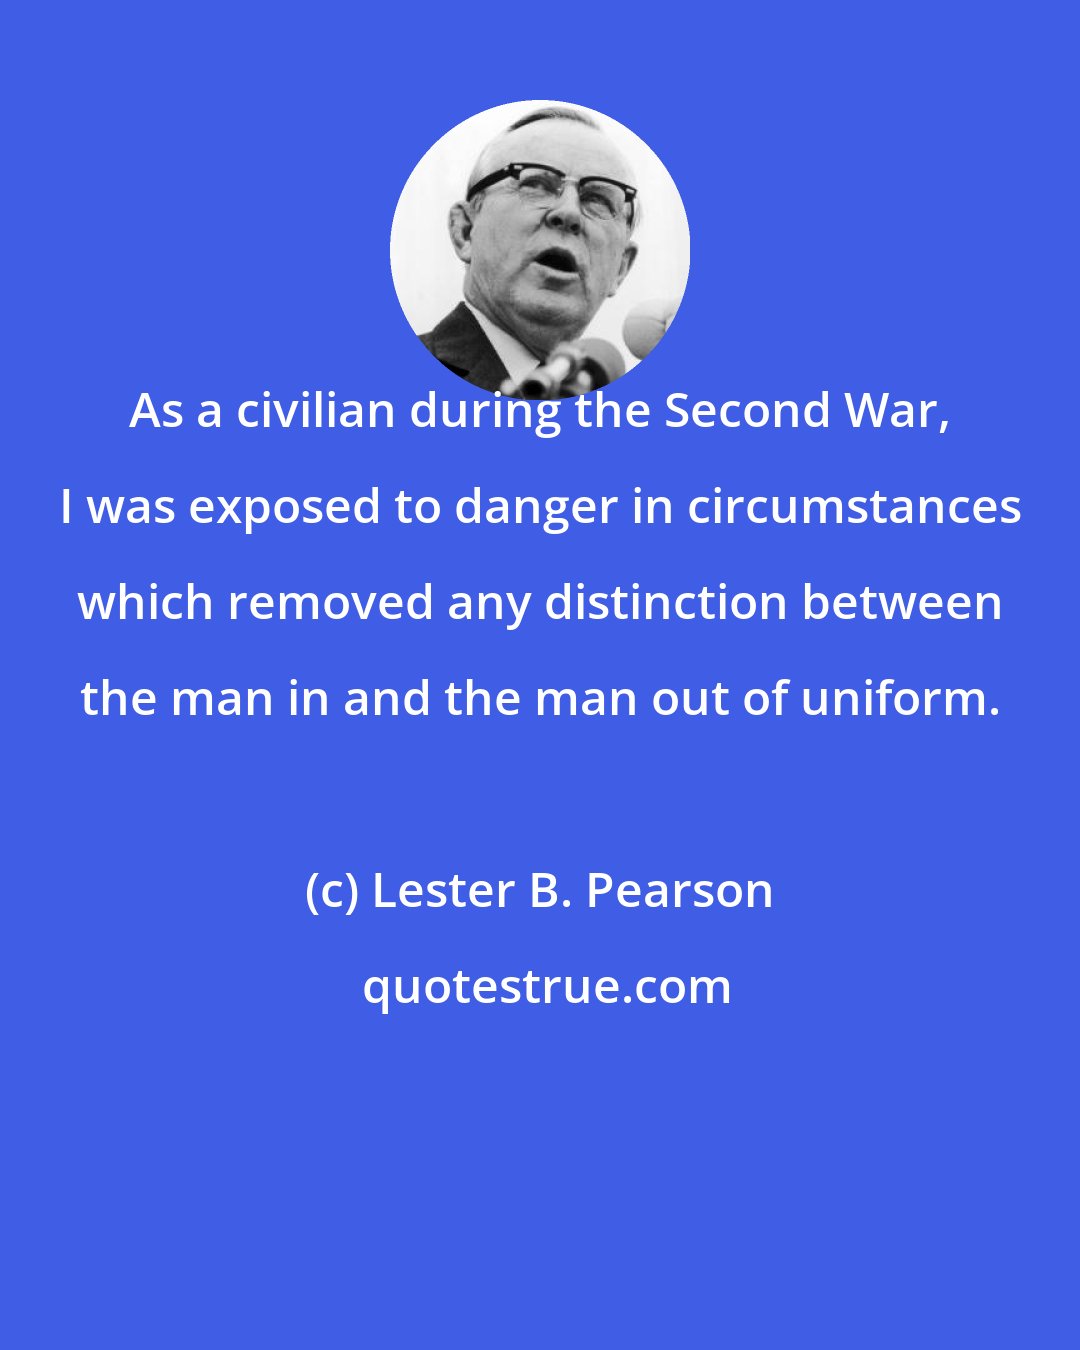 Lester B. Pearson: As a civilian during the Second War, I was exposed to danger in circumstances which removed any distinction between the man in and the man out of uniform.